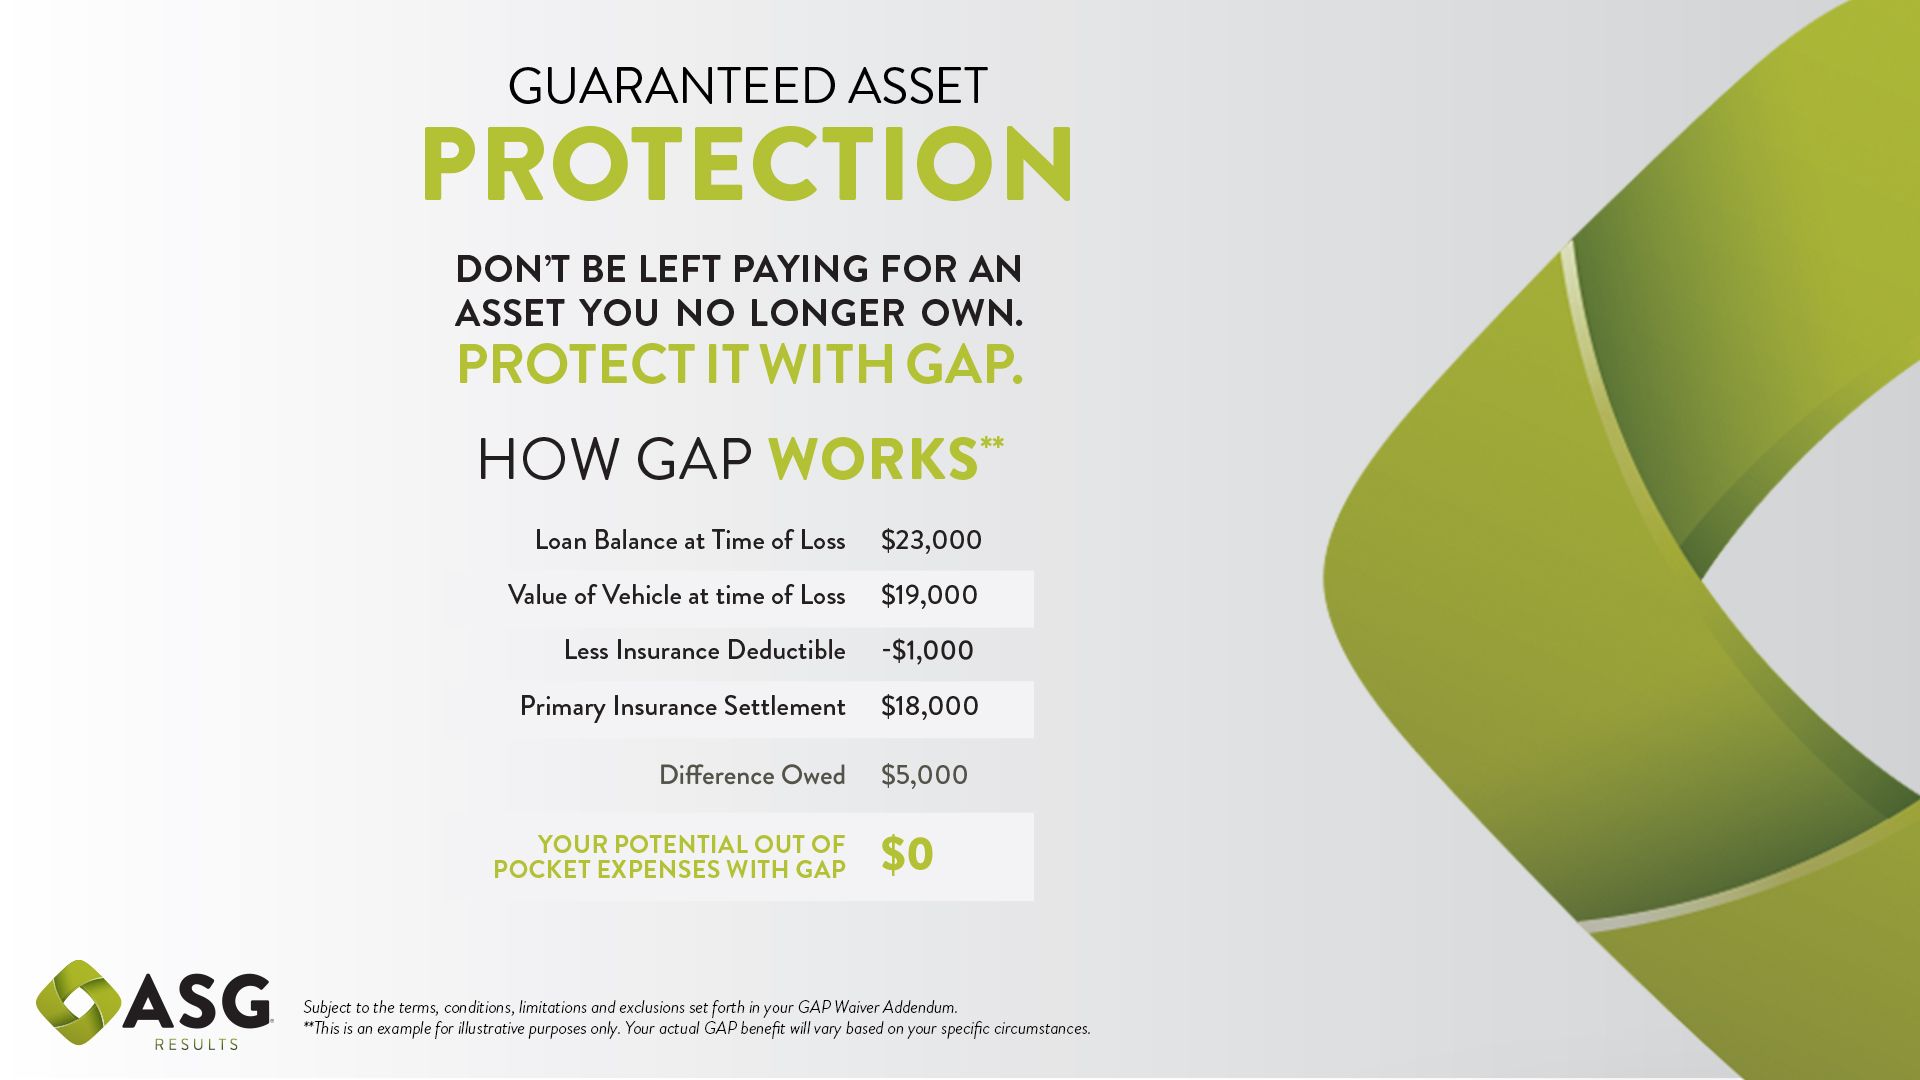 GAP Protection Slide - Call 303-450-0719 for assistance.